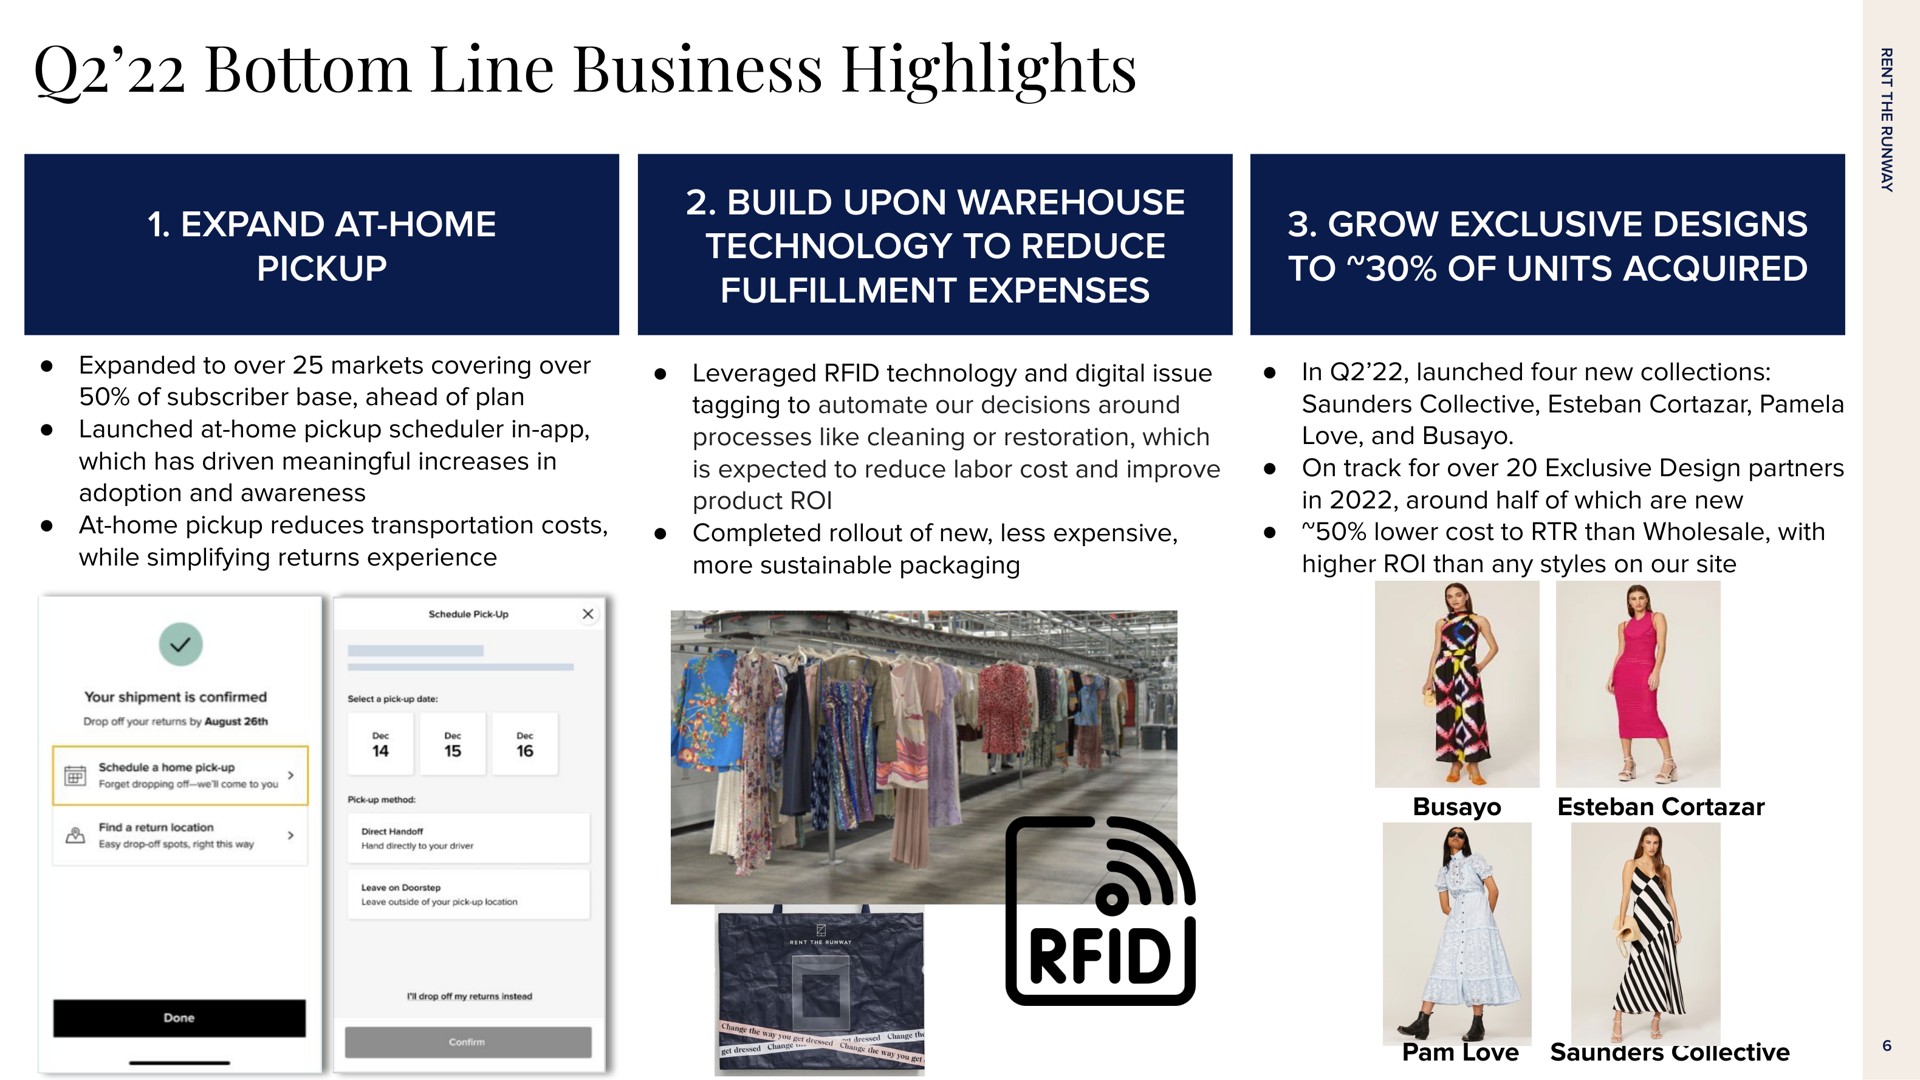 bottom line business highlights expand at home pickup build upon warehouse technology to reduce fulfillment expenses grow exclusive designs to of units acquired | Rent The Runway